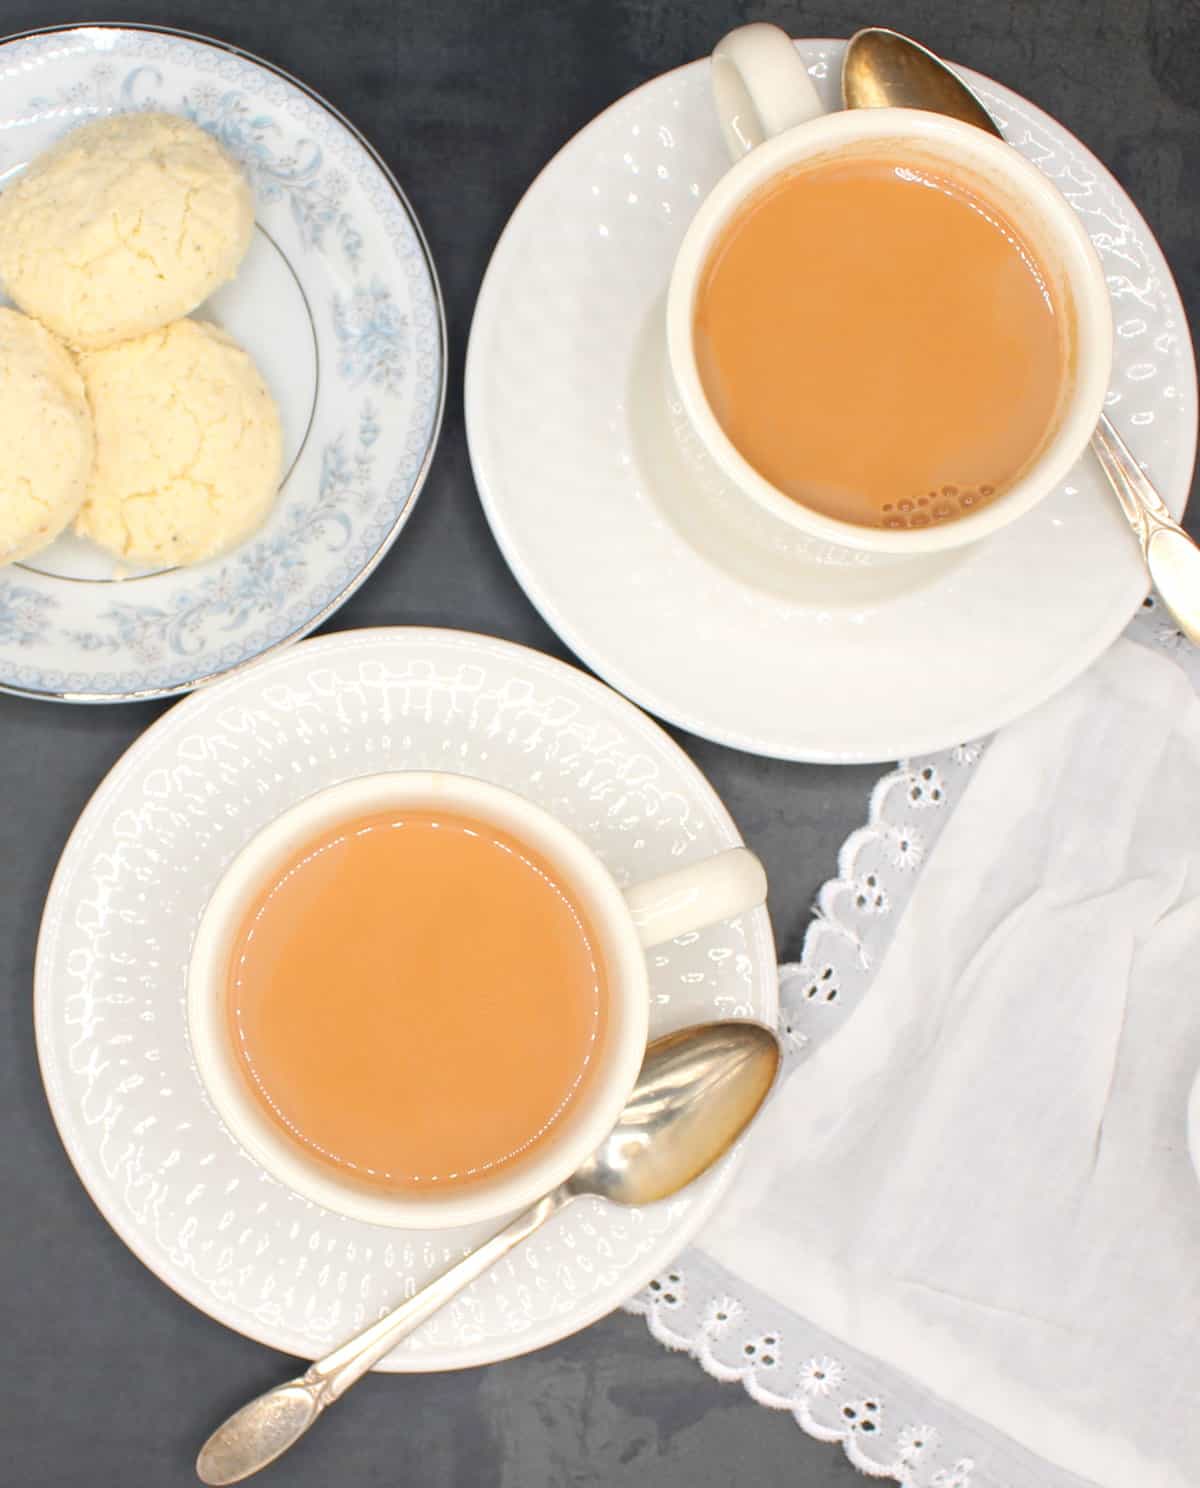 Masala chai in white cups and saucers with biscuits on the side.